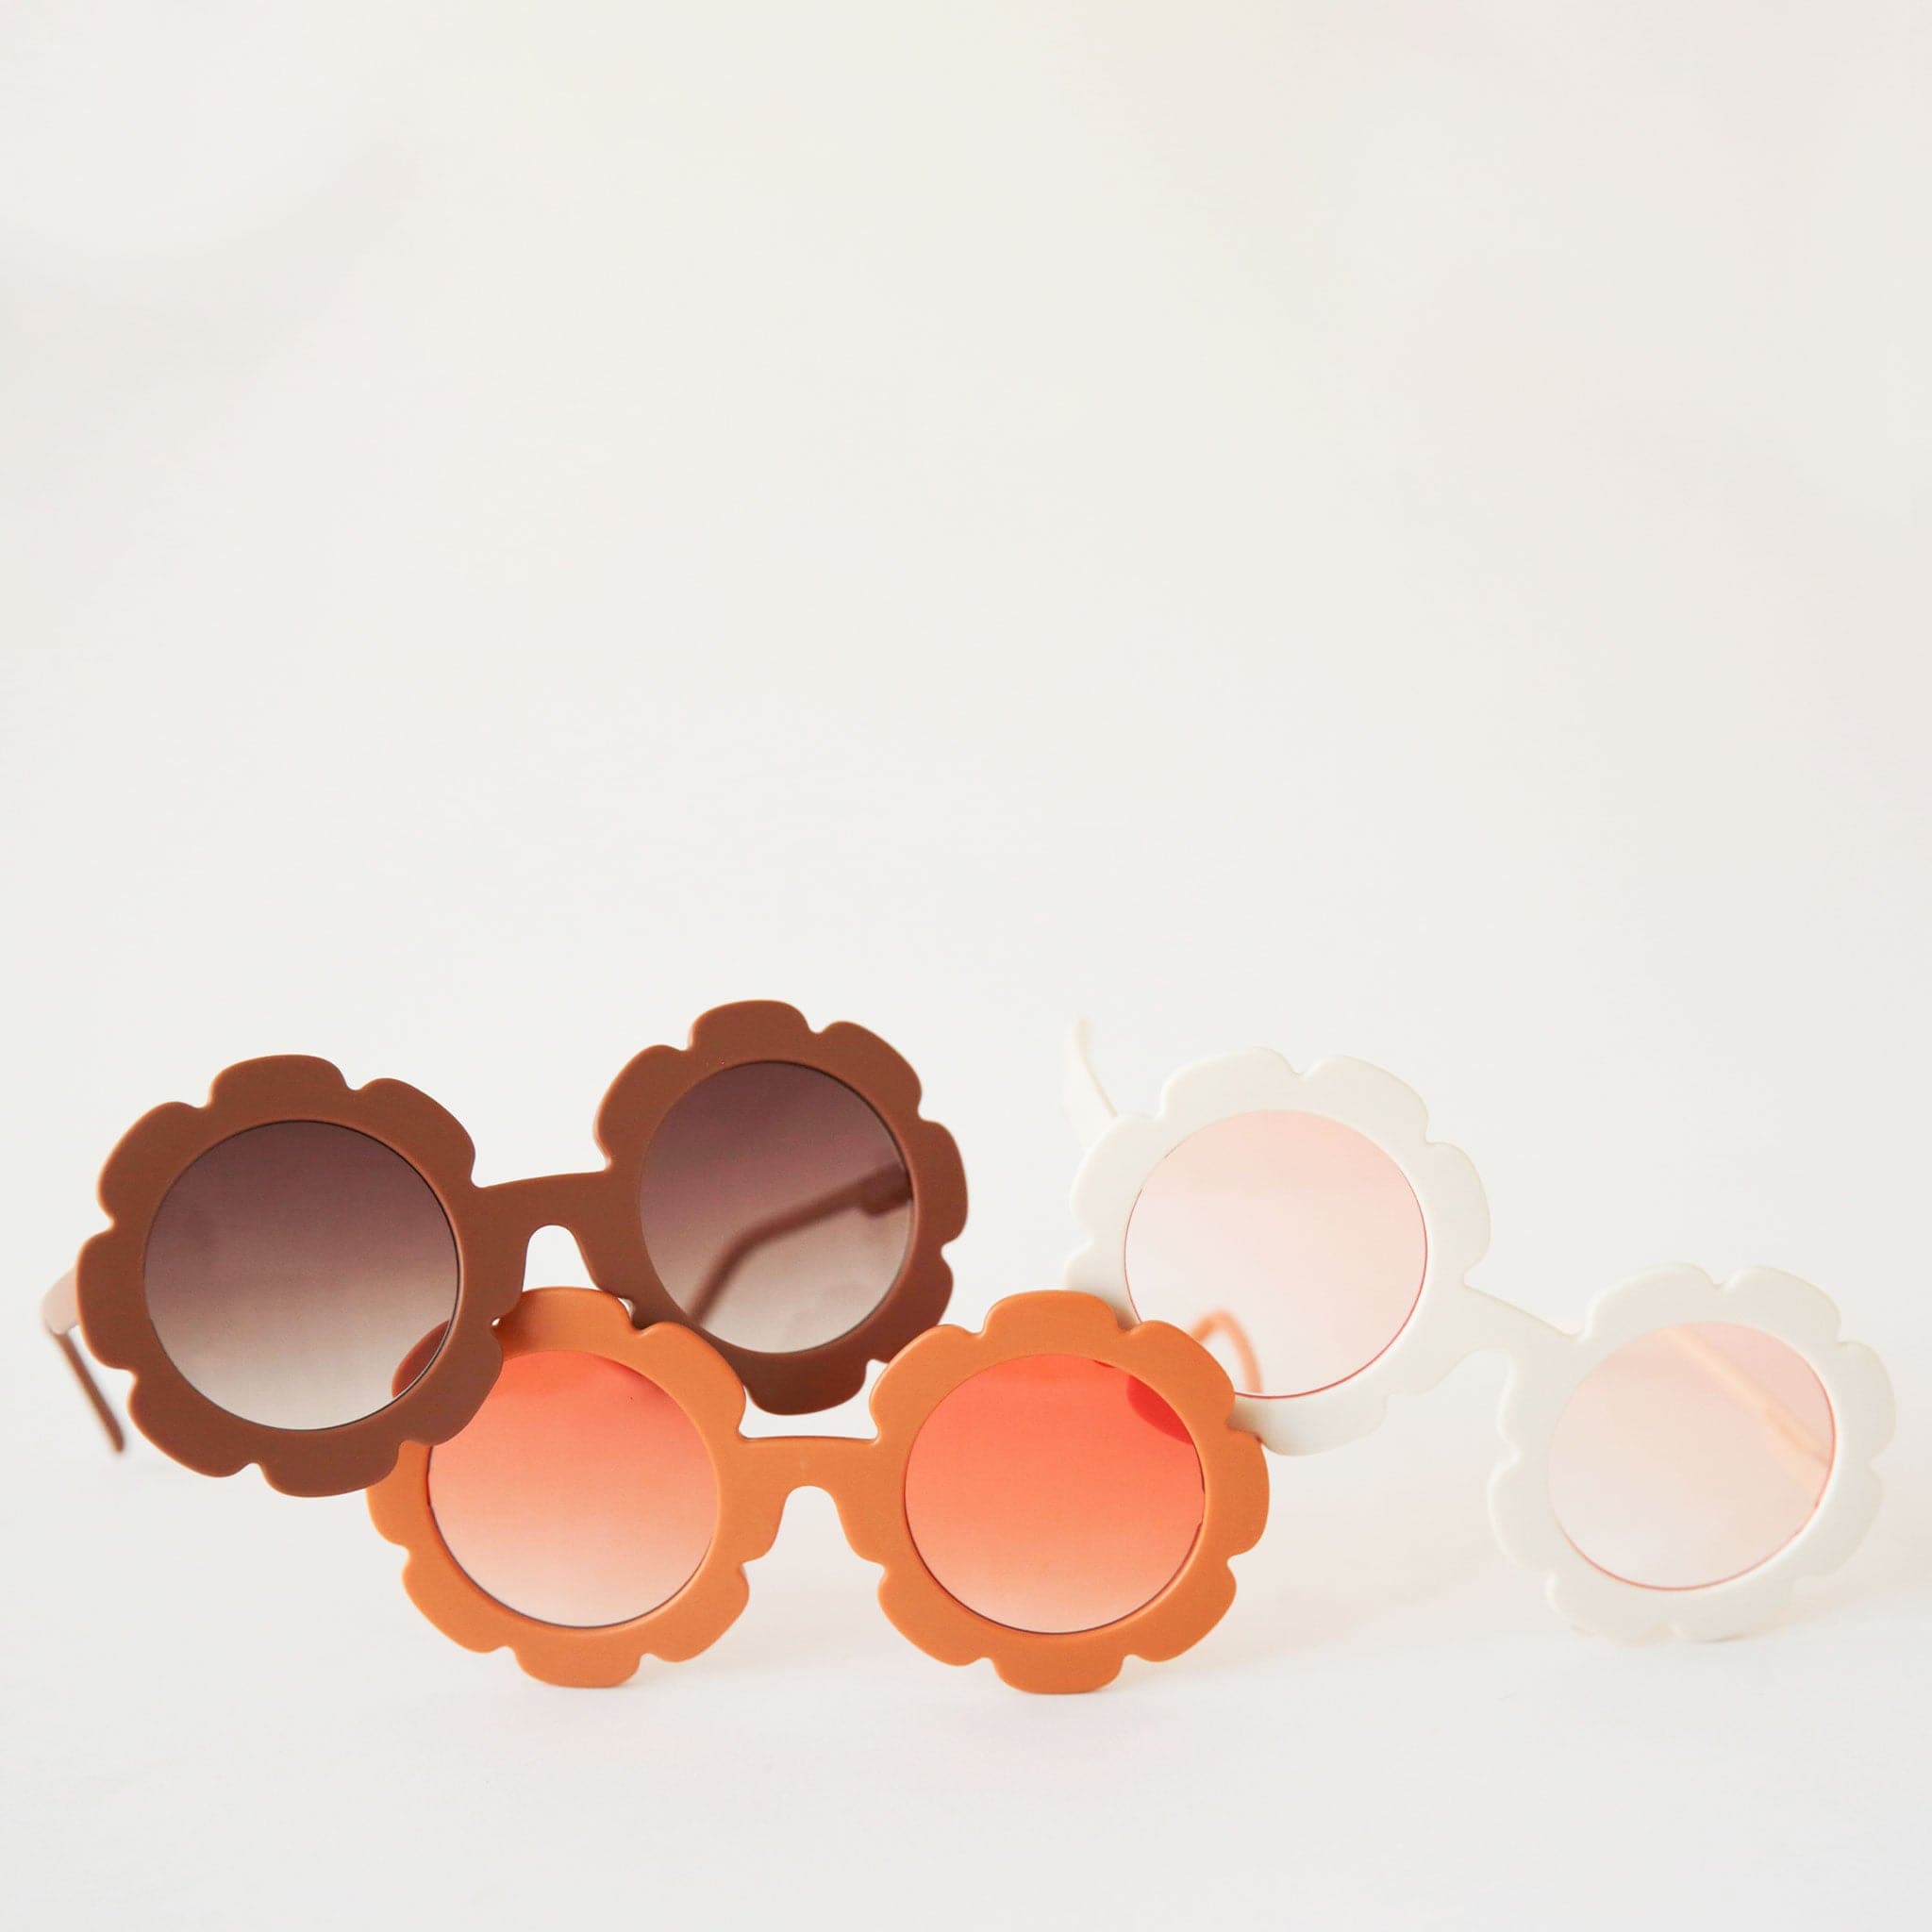 Brown flower shaped sunglasses with light brown circle lenses in the center photographed here with the other color ways available. One is an orange frame with a light orange lens and the other a white frame with a light pink lens.